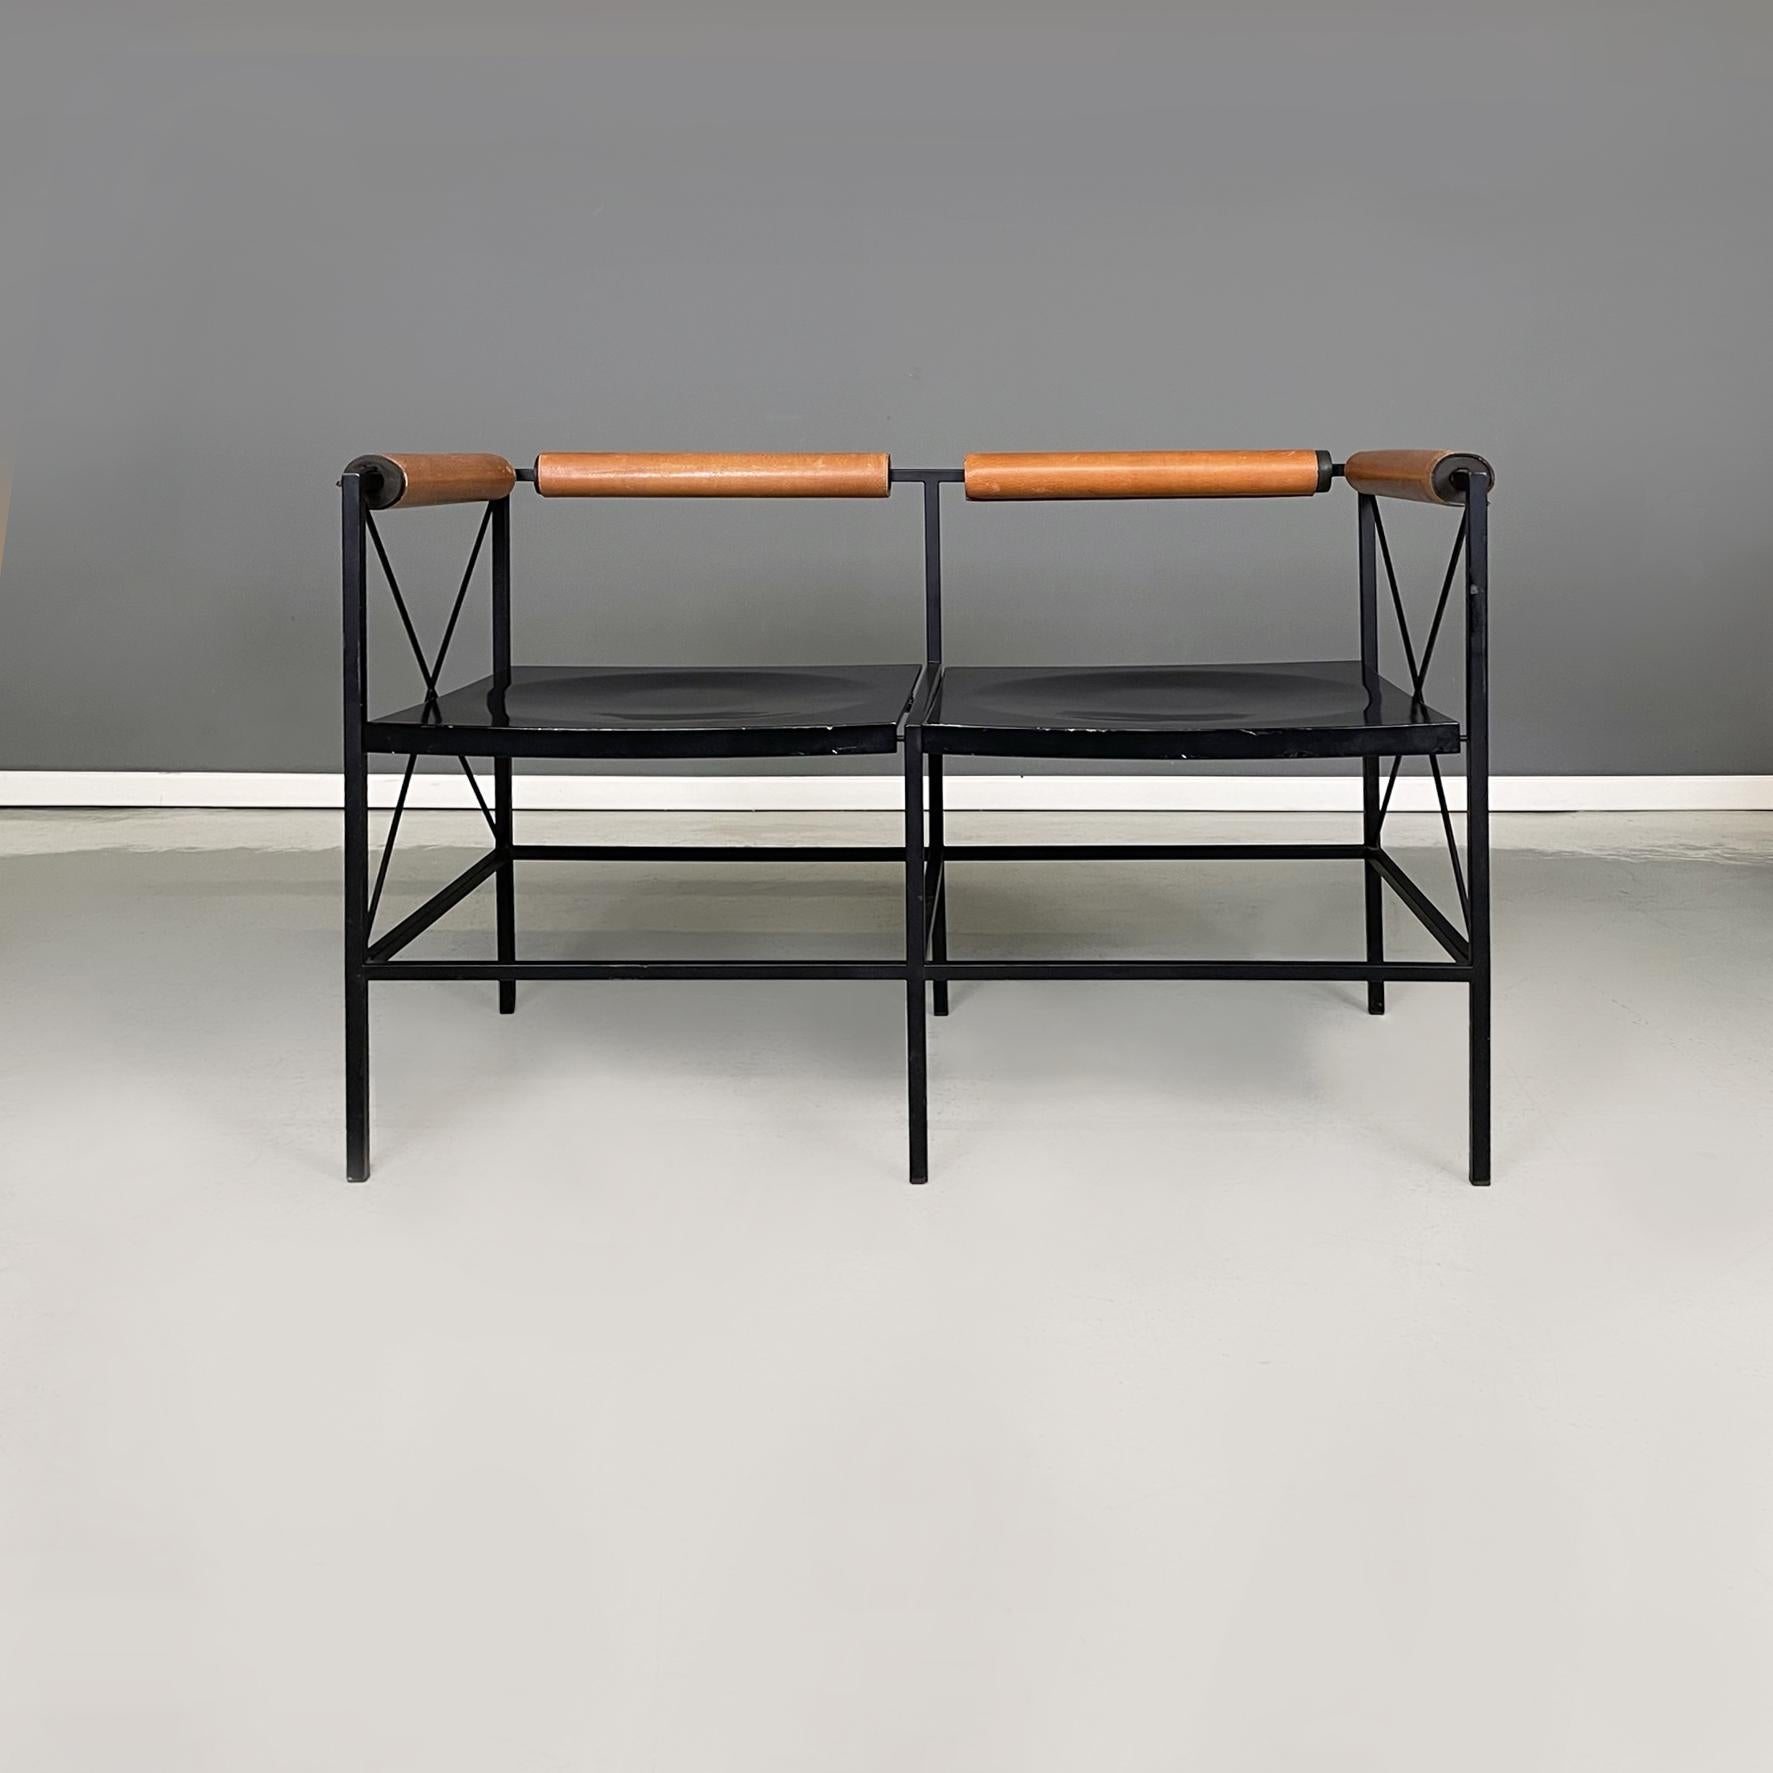 Modern Italian modern black metal wood brown leather 2seater benches Felicerossi, 1980s For Sale